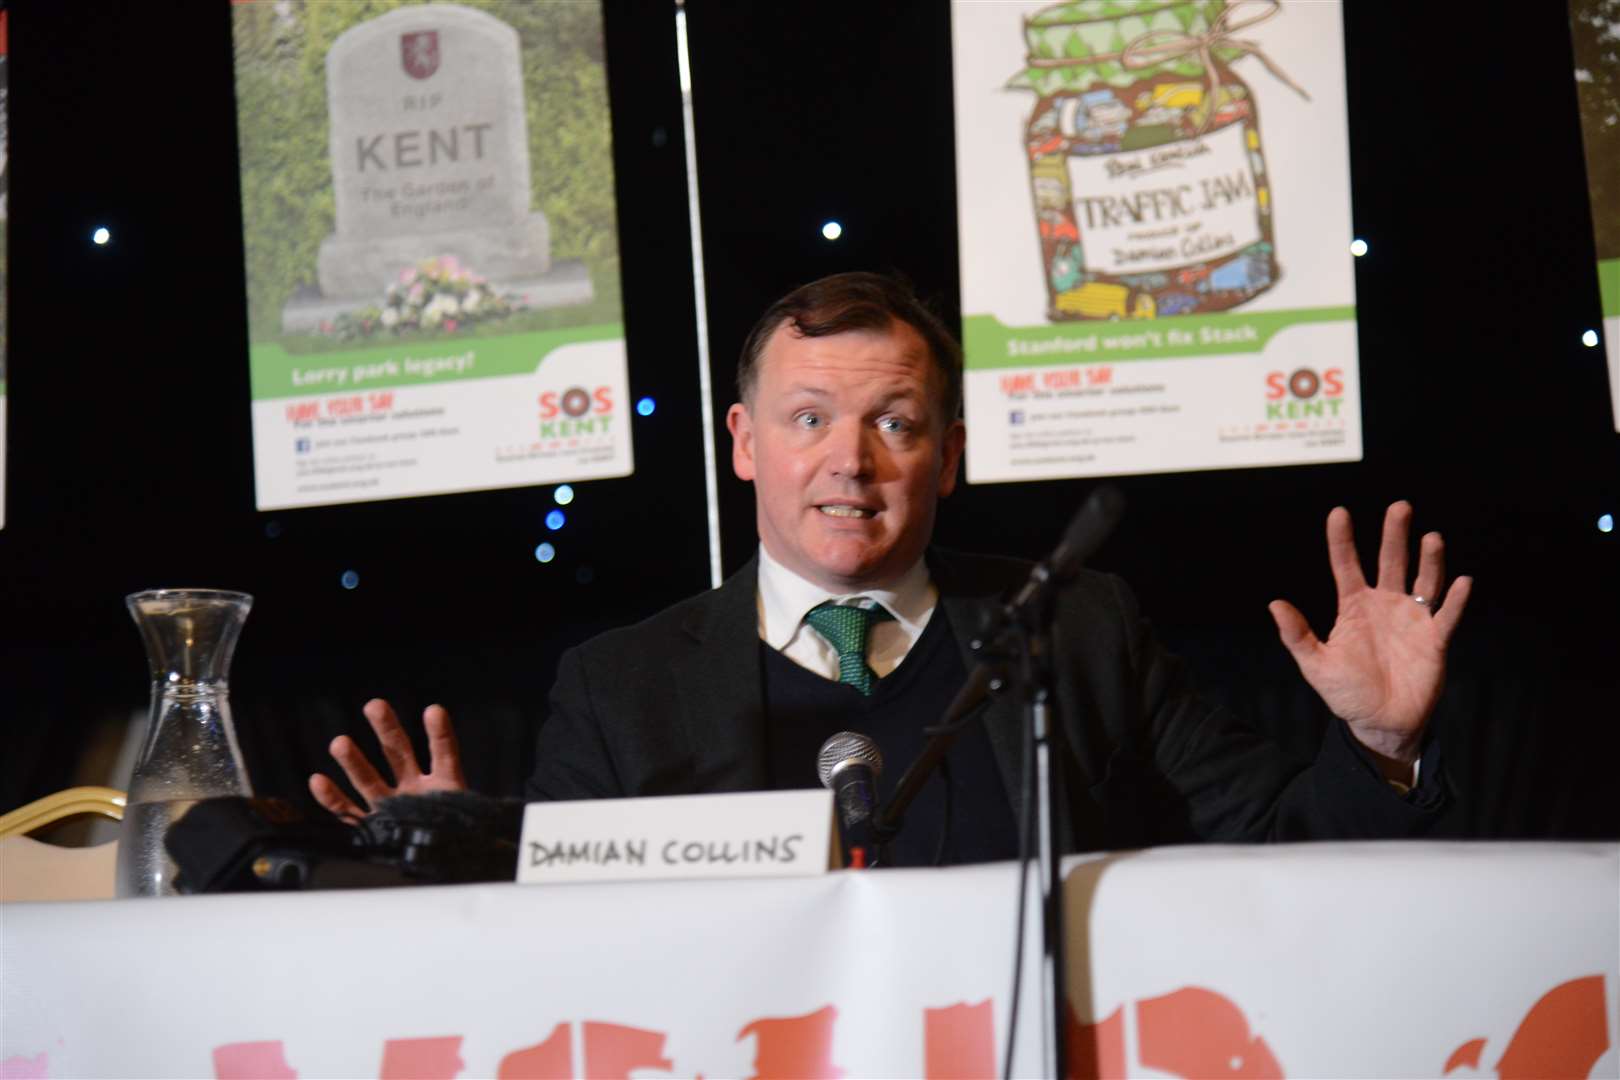 MP Damian Collins answering protesters' questions about the Stanford lorry park. Picture: Gary Browne